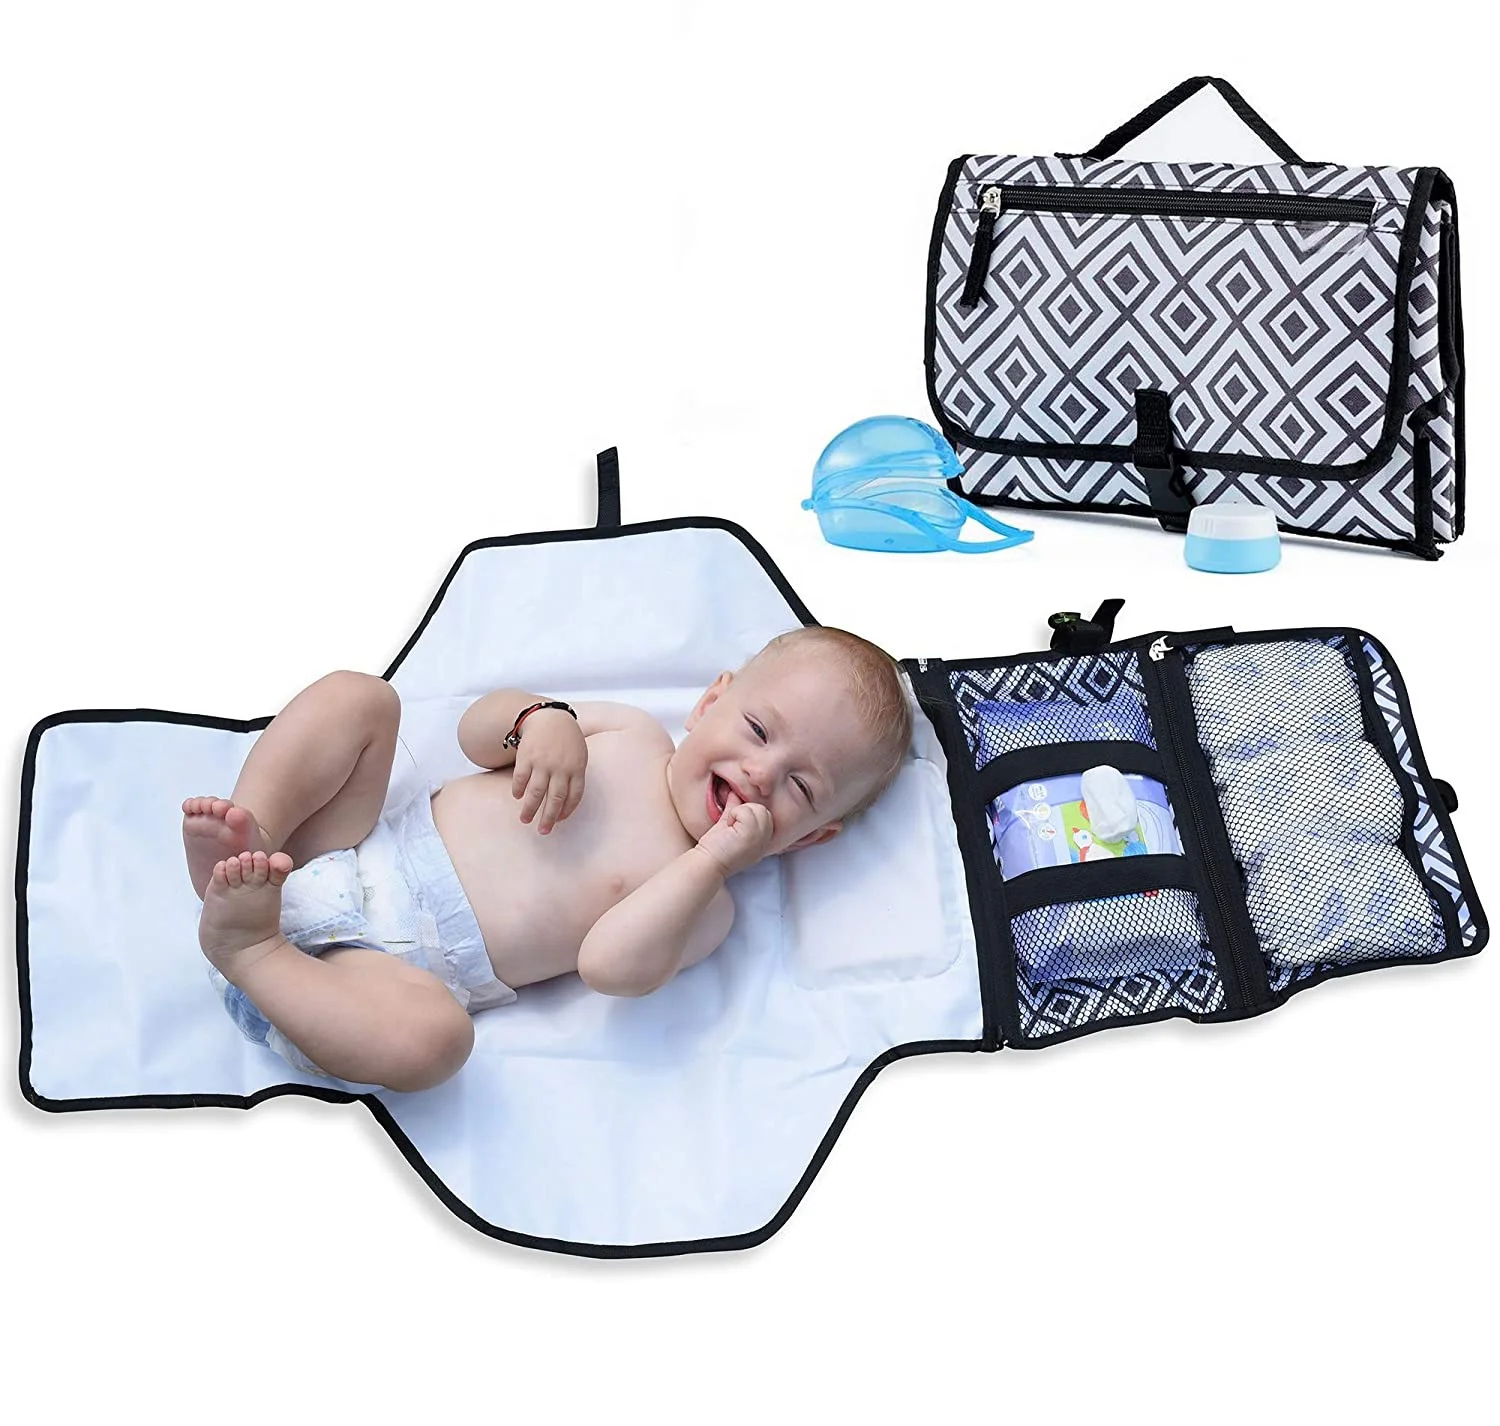 

High Quality Travel Changer Station Kit for Baby Waterproof Diaper Changing Pad Tote Bag 11.8 X 7.9 X 1 Inches or Custom 300pcs, As pic or as customized